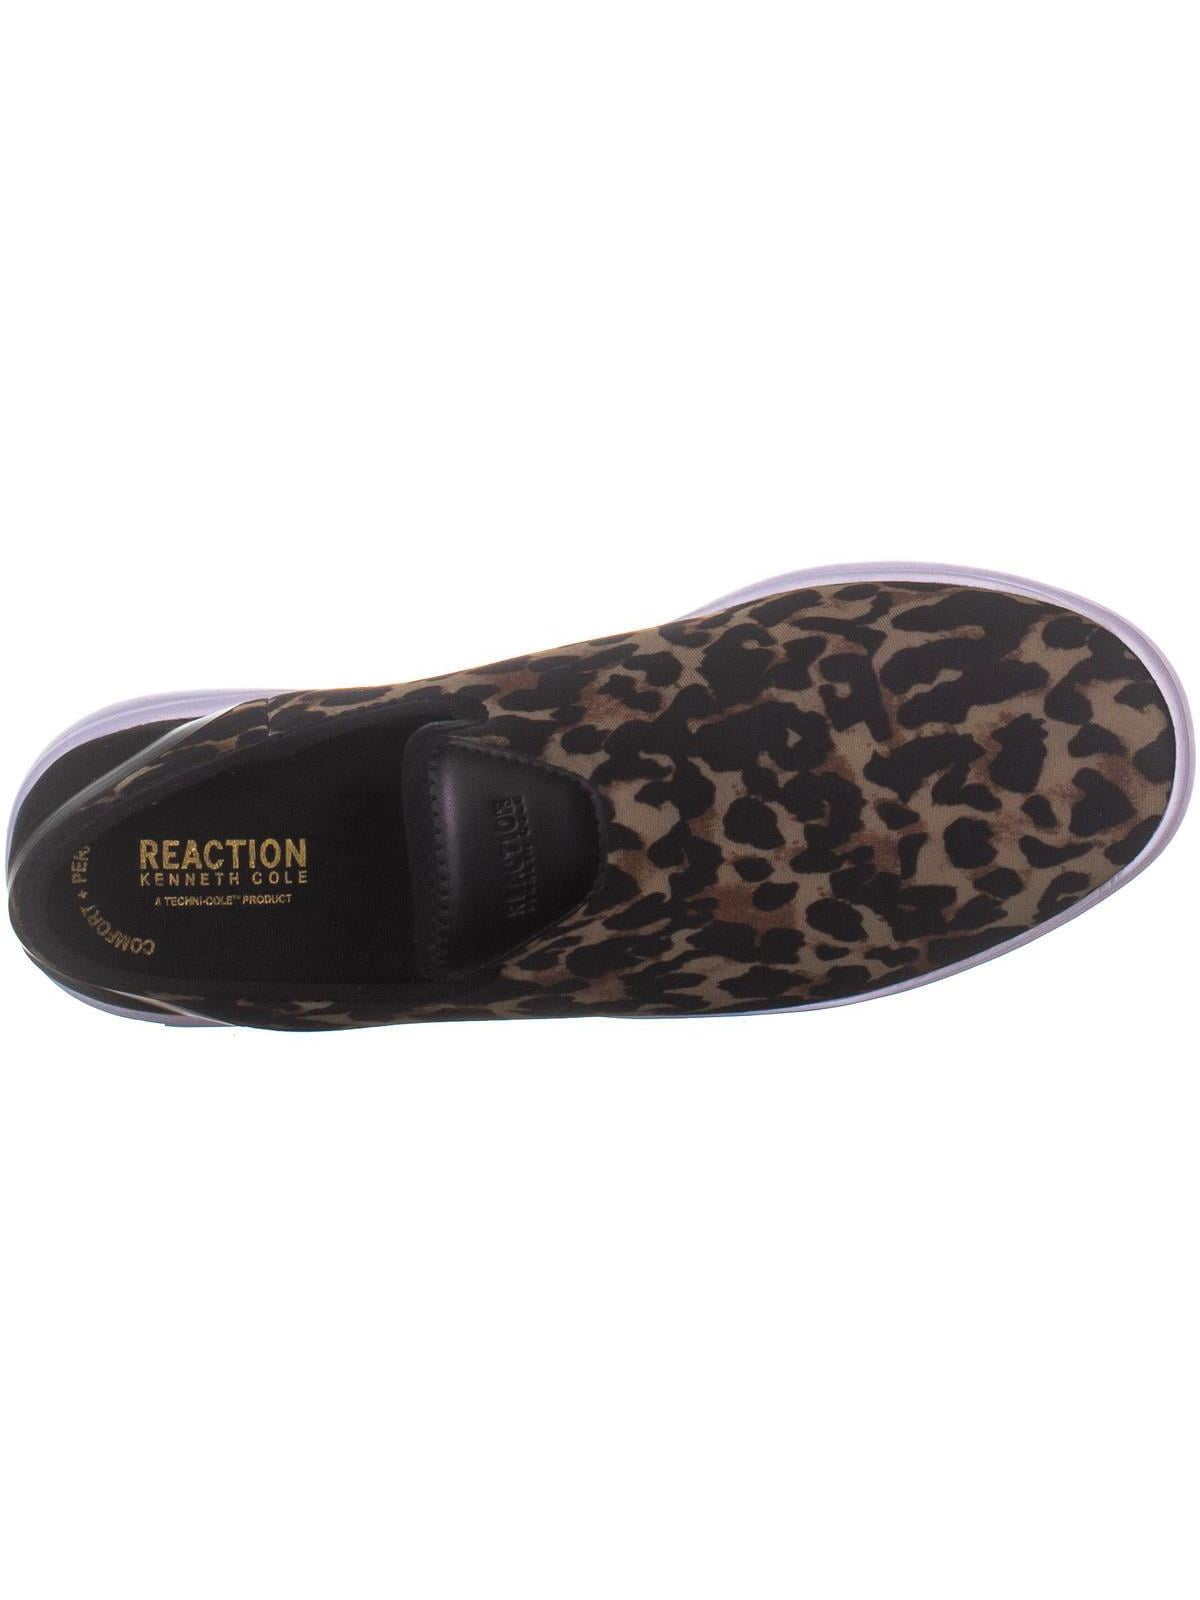 kenneth cole reaction leopard slip ons